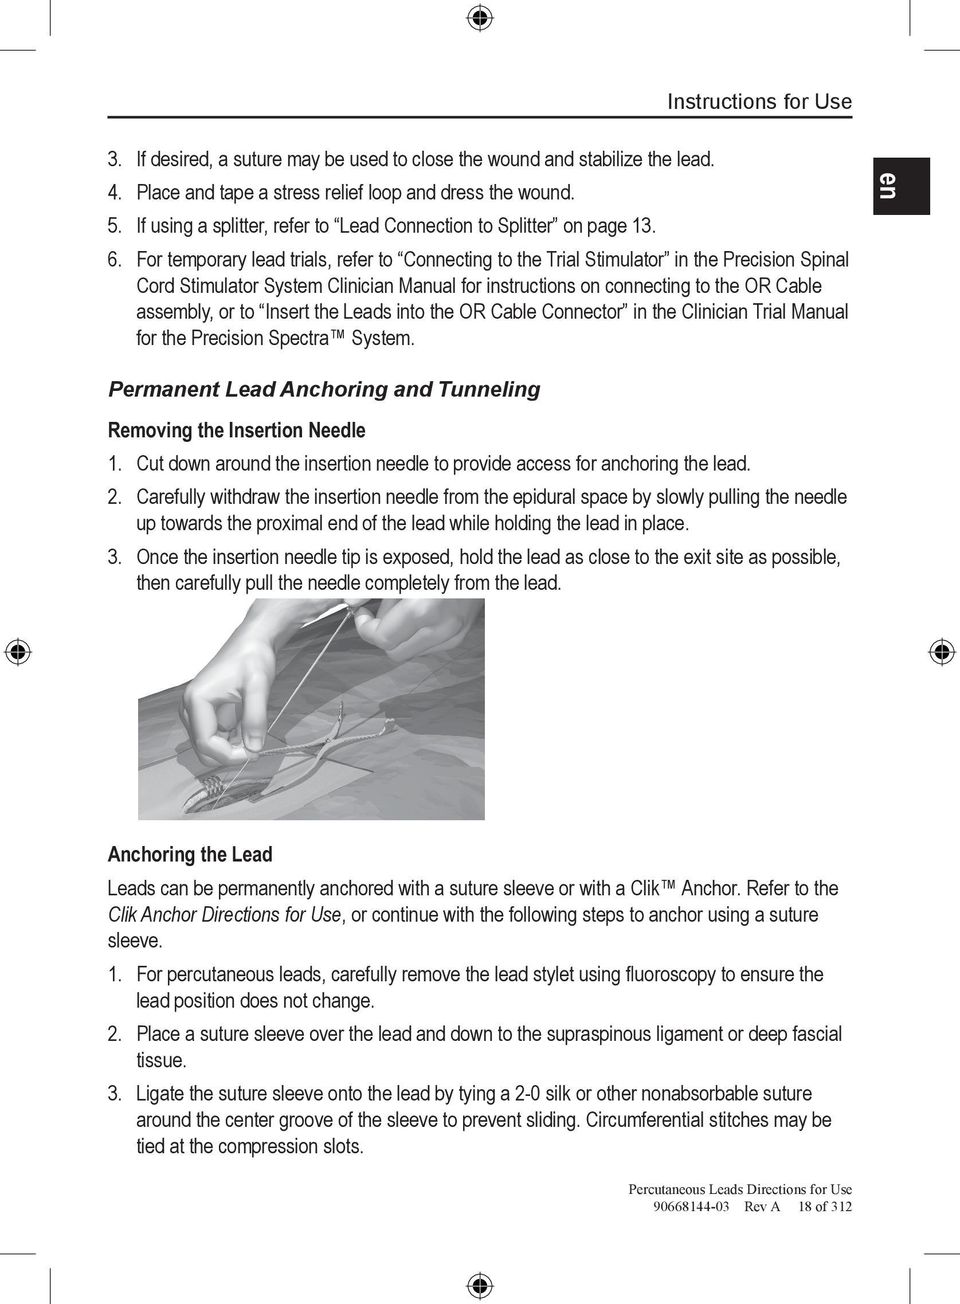 For temporary lead trials, refer to Connecting to the Trial Stimulator in the Precision Spinal Cord Stimulator System Clinician Manual for instructions on connecting to the OR Cable assembly, or to